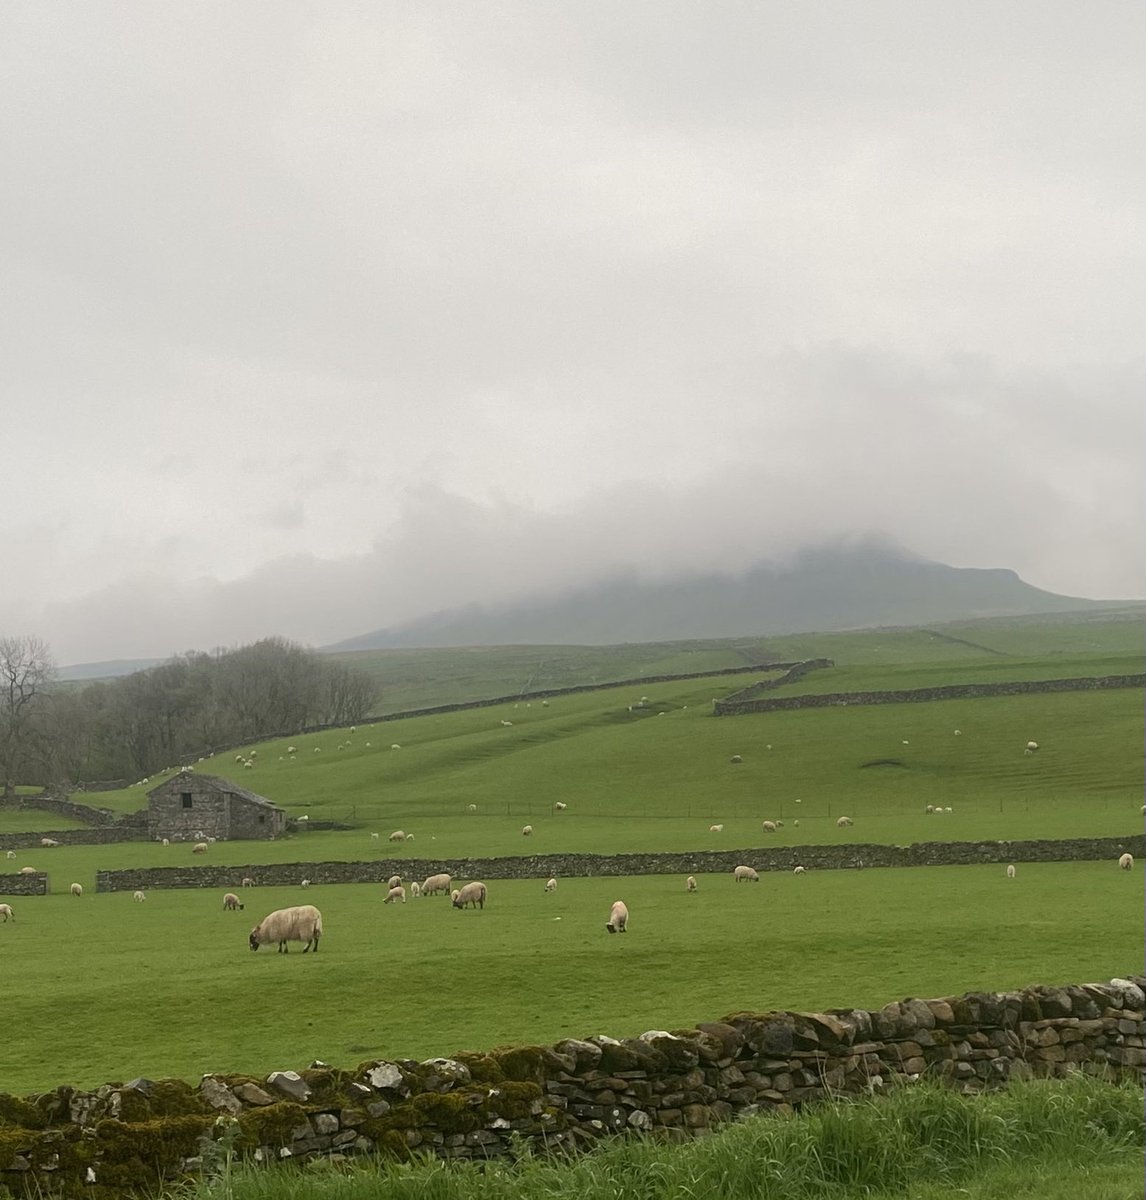 Its that time of year in the #yorkshiredales #Ribblesdale is once more brimming with new life & new growth.
#circleoflife #TheDales #yorkshire #3peaks